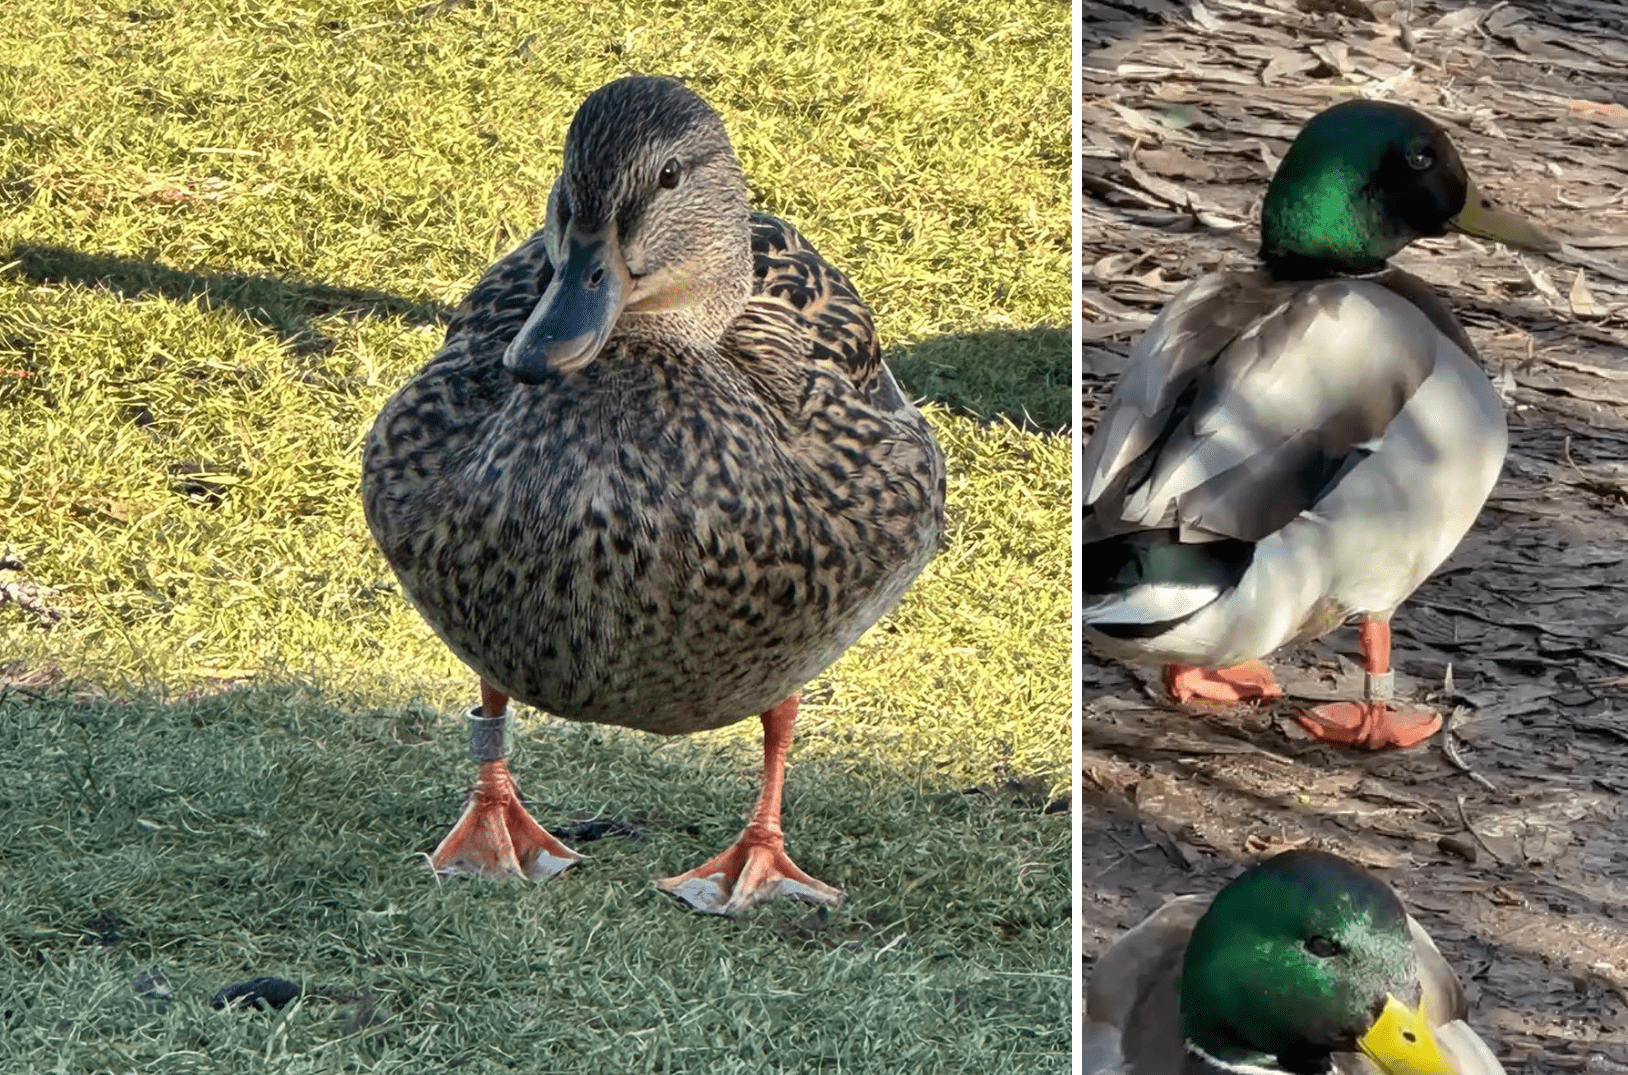 Pair of mallard ducks - male and female - with metal leg bands